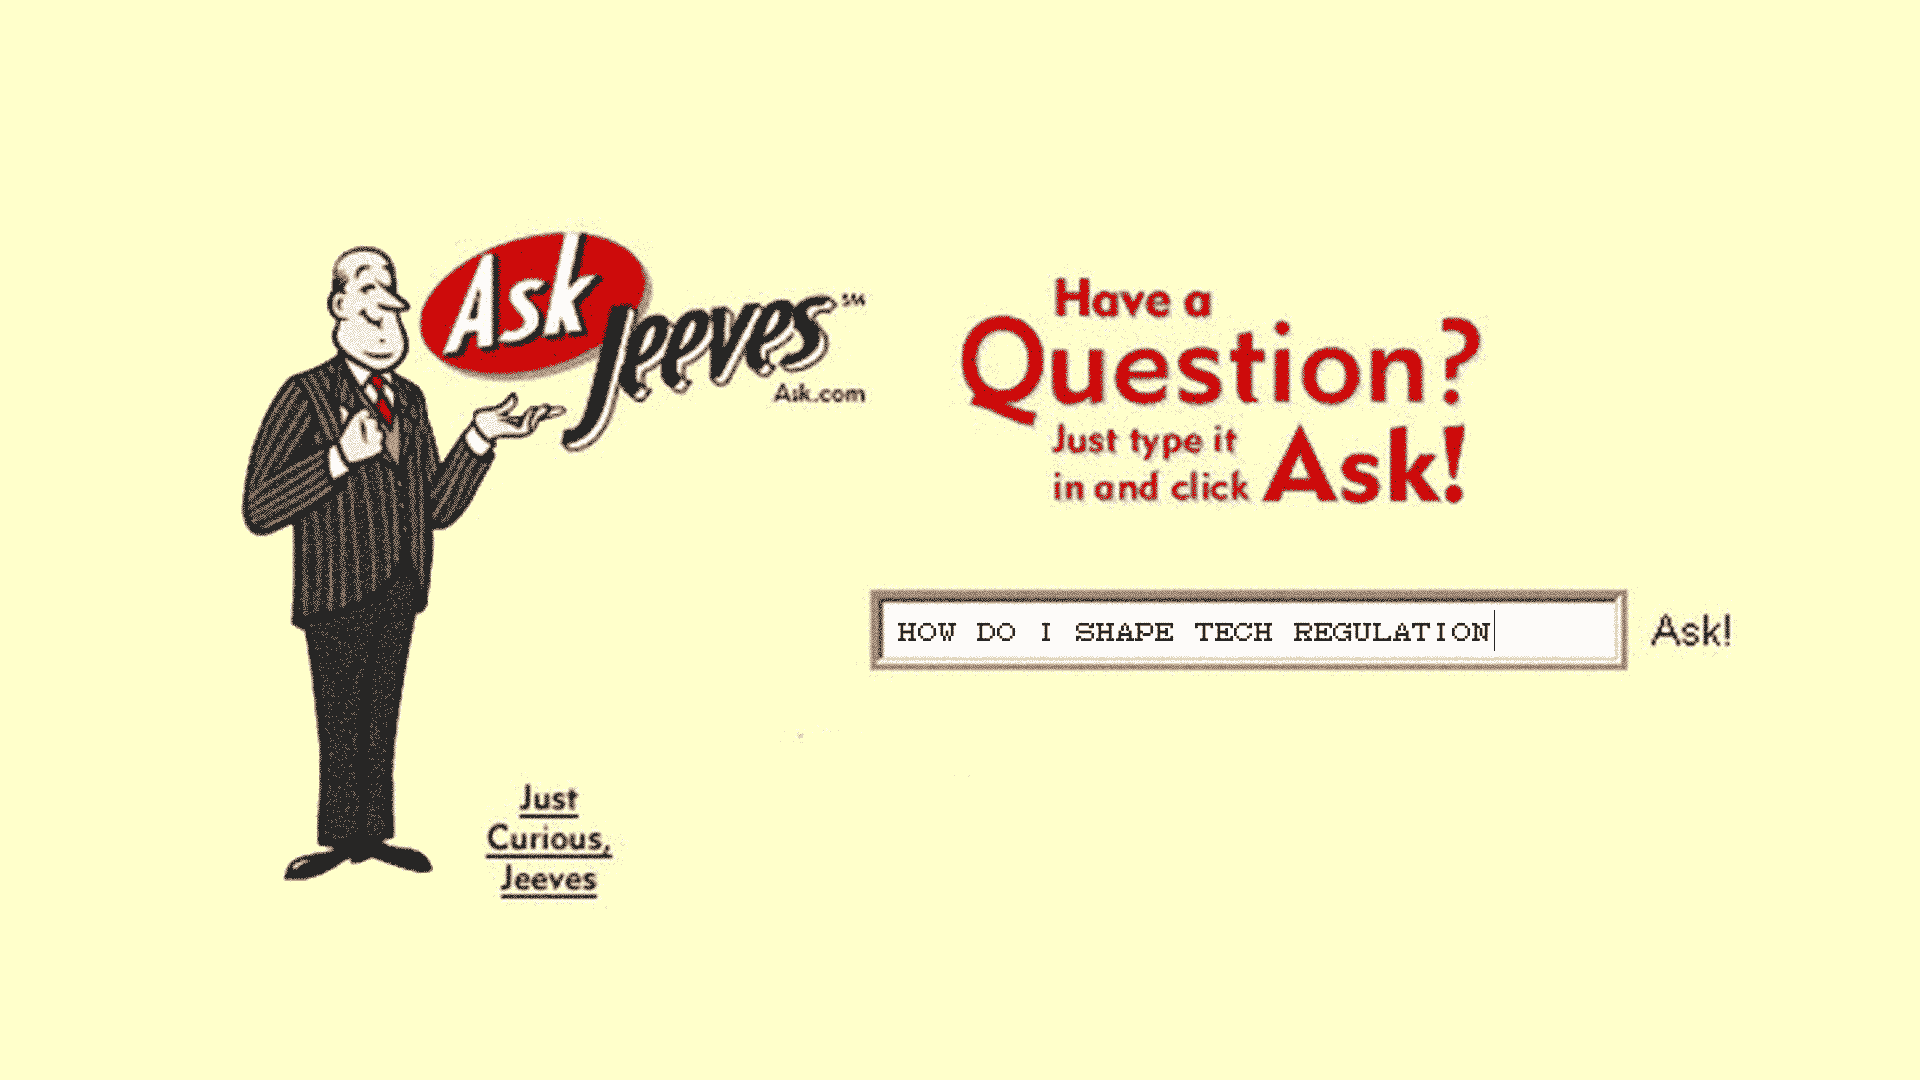 “How do I shape tech regulation” typed into an Ask Jeeves search engine